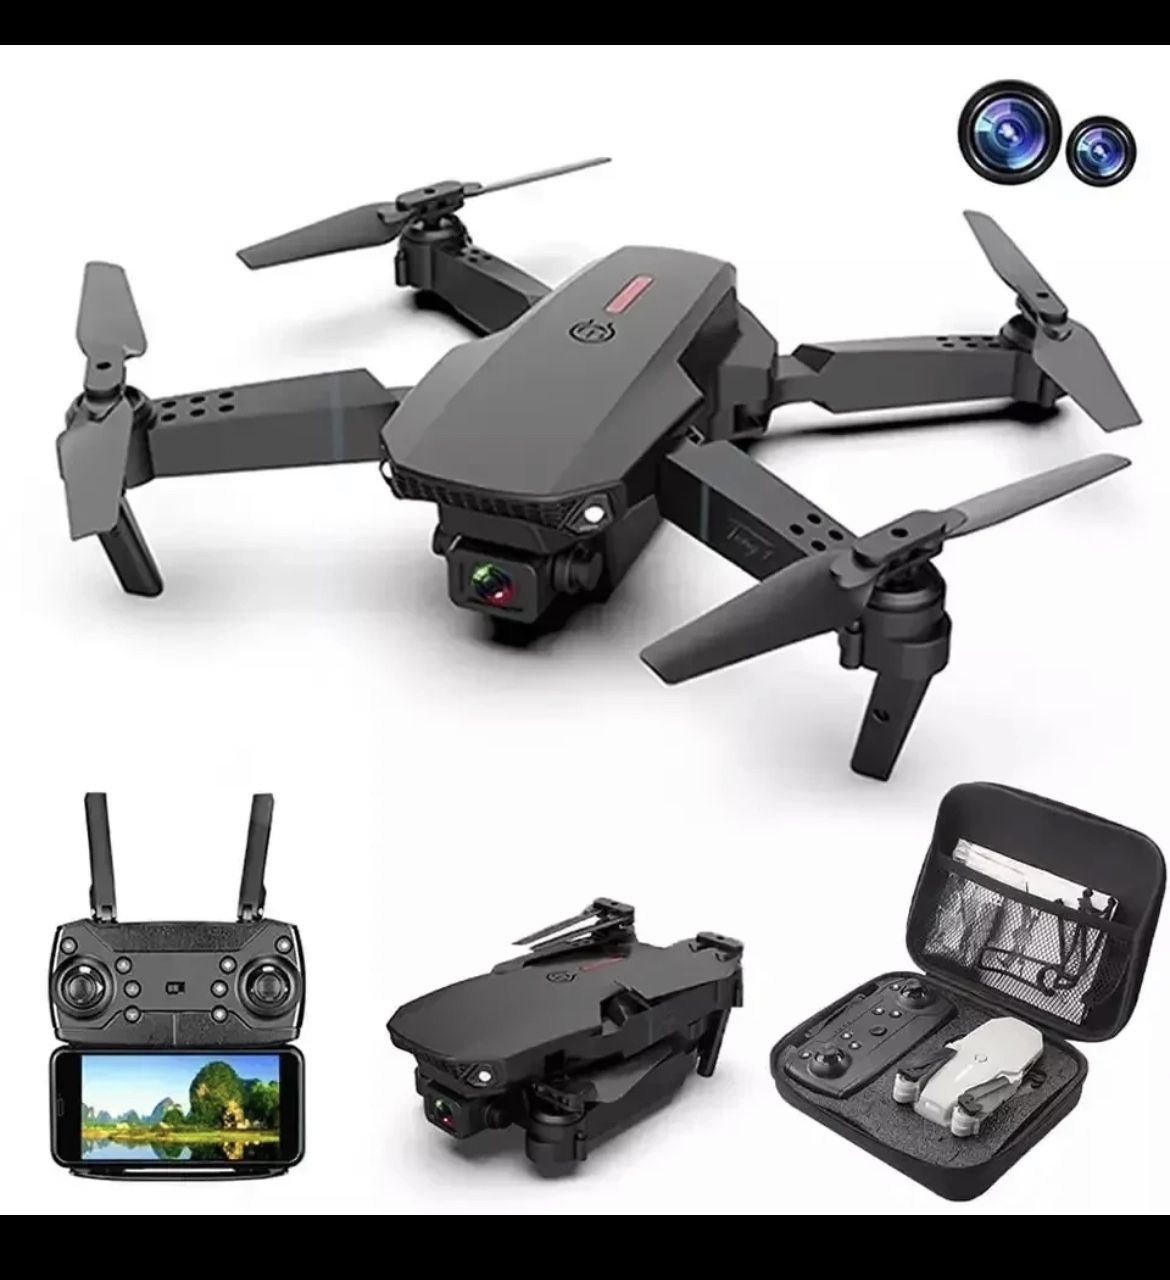 Brand New Drone E88 Pro 4K-dual camera flagship HD aerial photography I 13-15 minutes long battery life